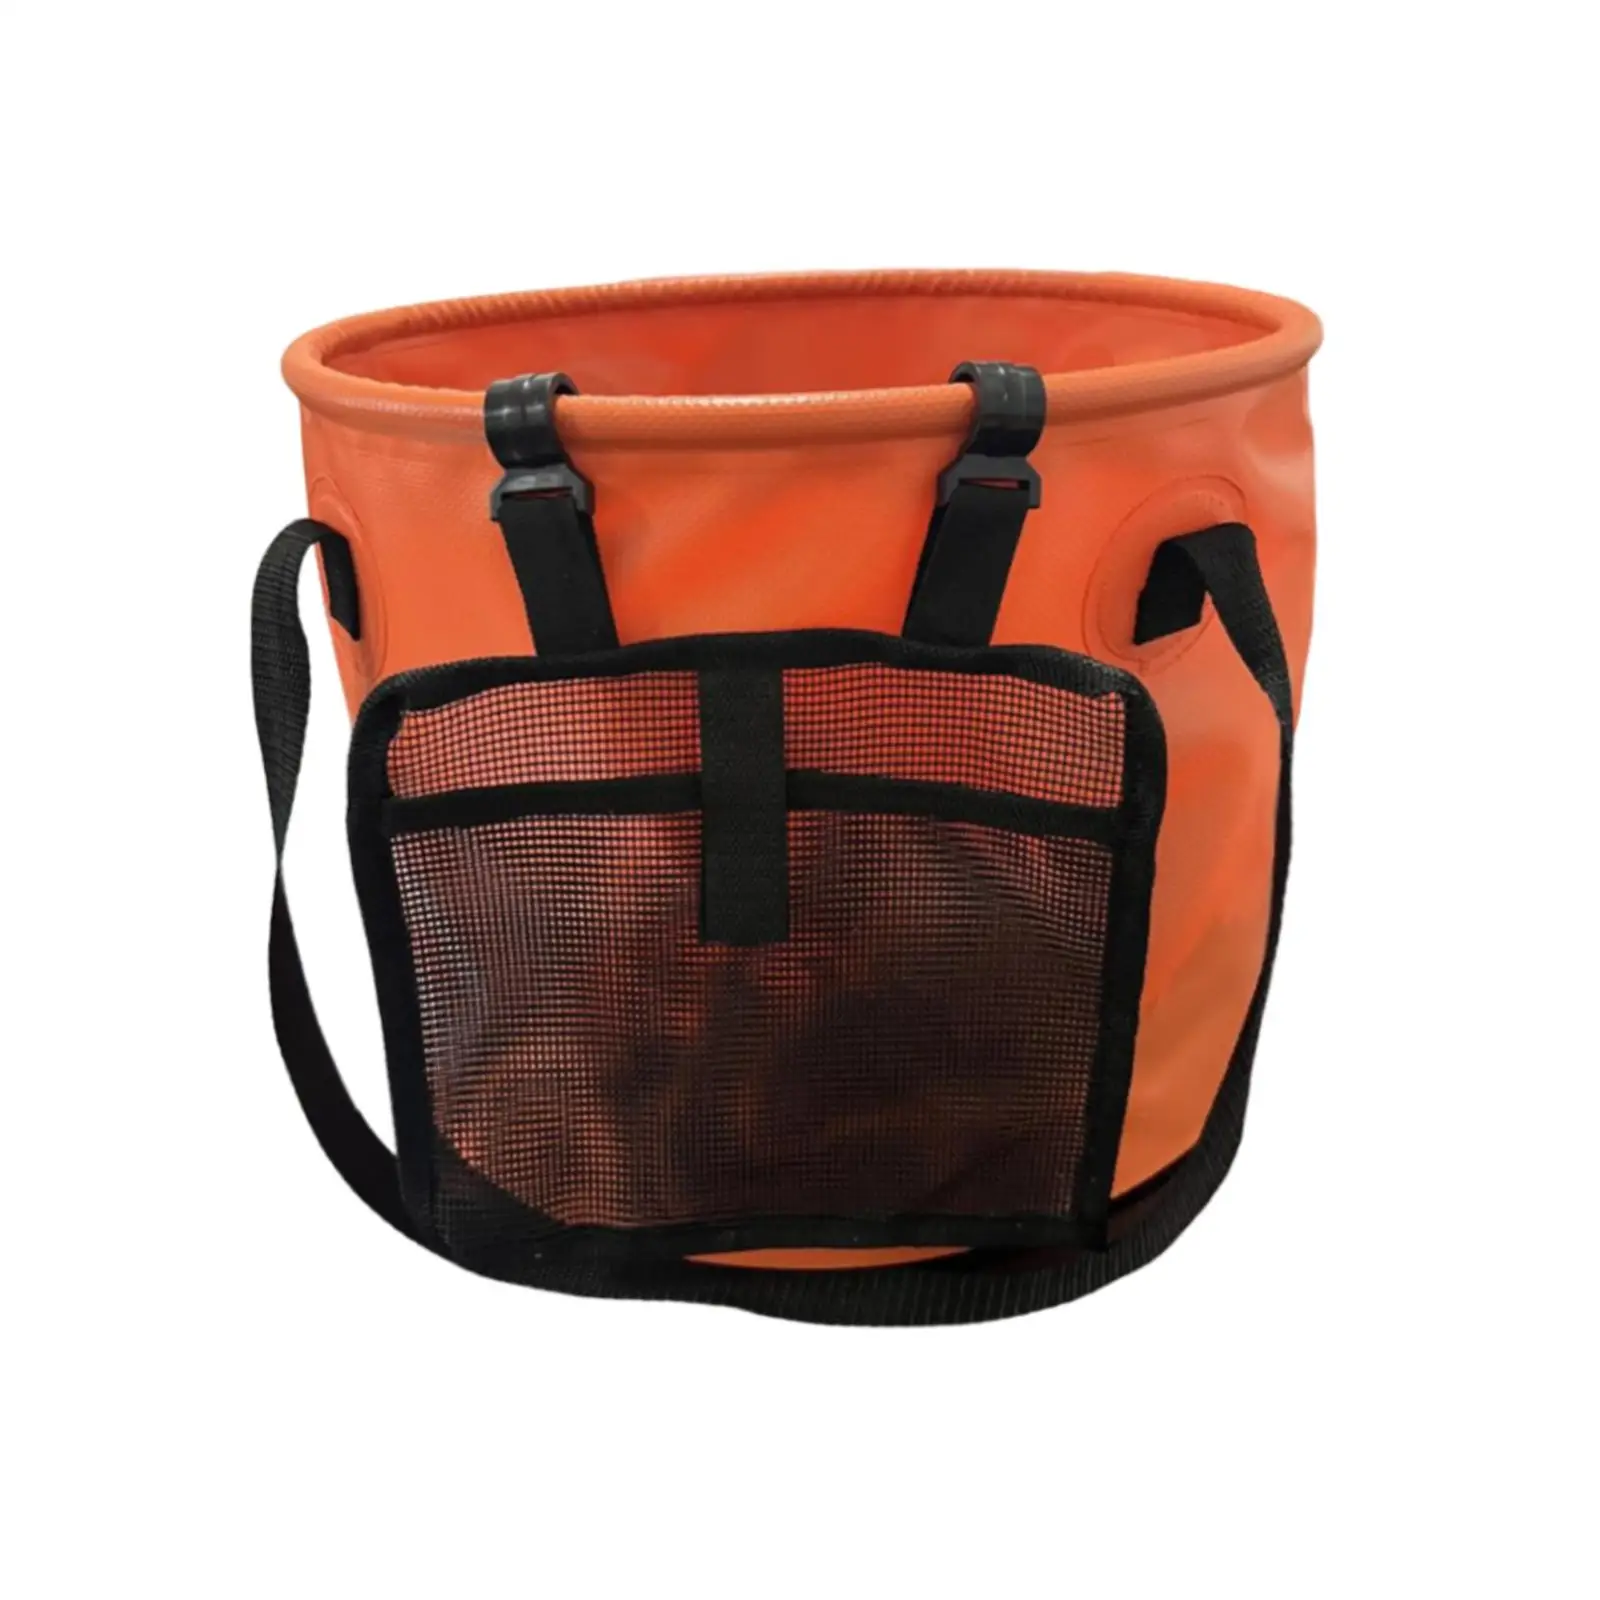 Collapsible Bucket with Handle Water Bag Foldable Water Bucket Collapsible Wash Basin for Cleaning Beach Travelling Car Washing